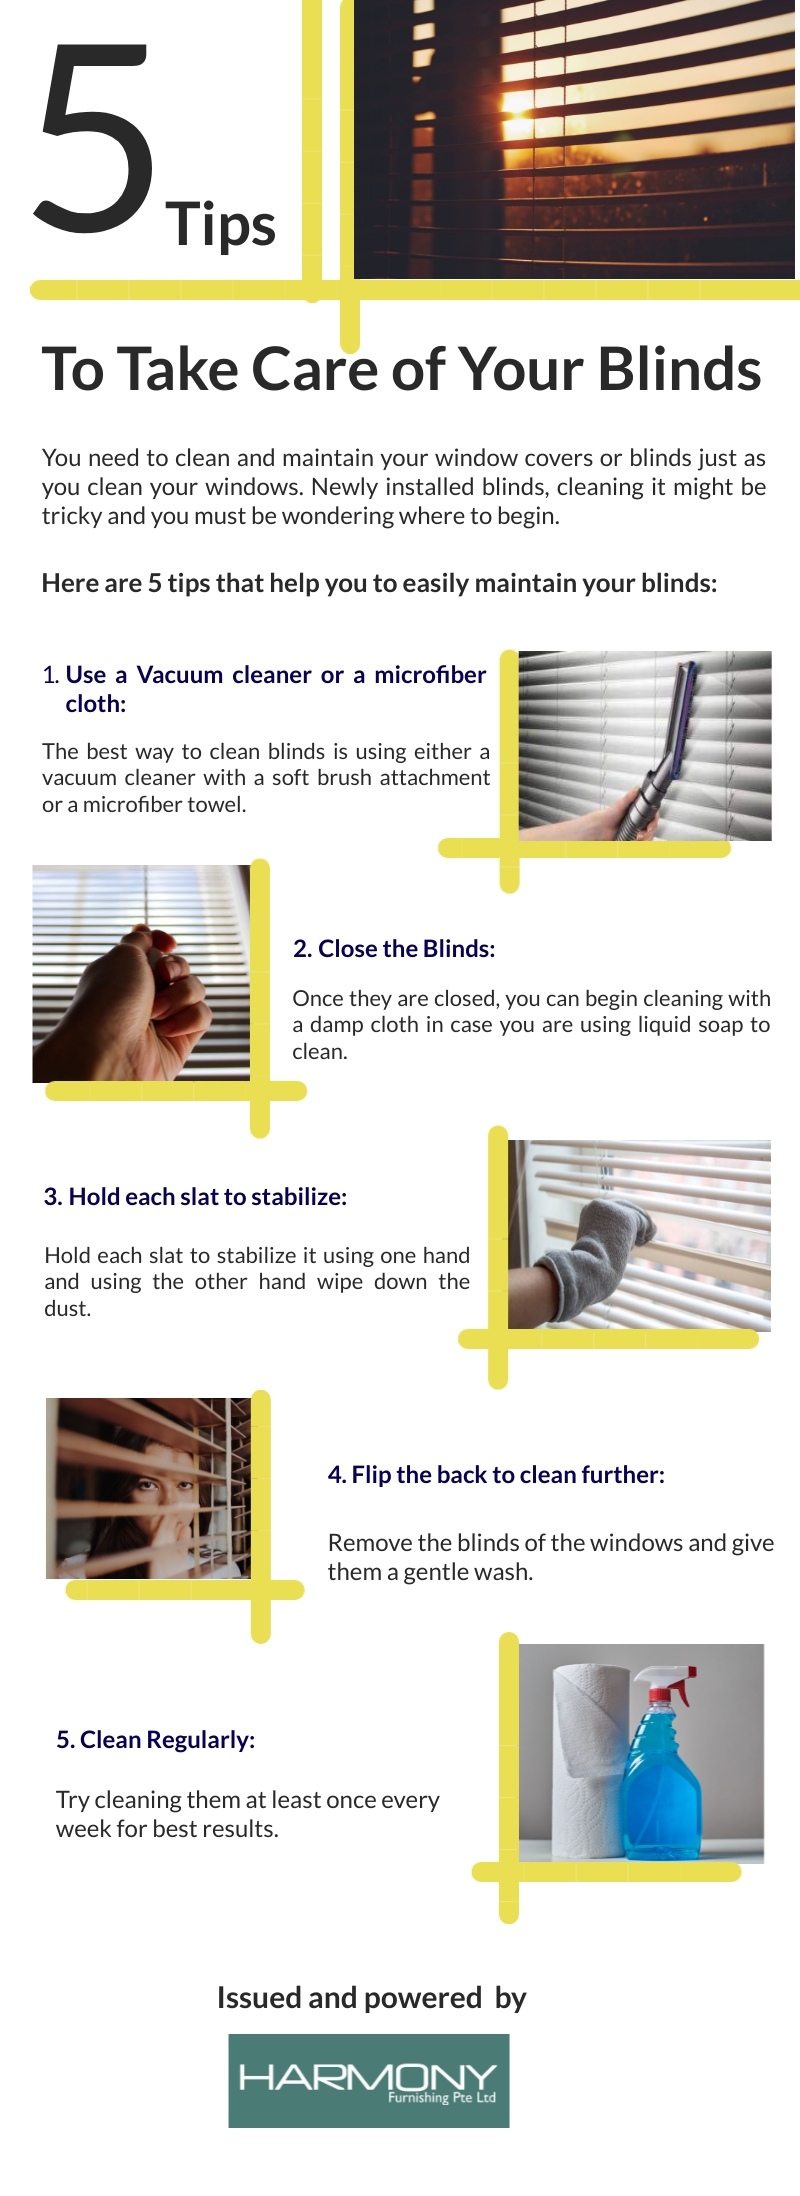 5 Tips to Take Care of Your Blinds